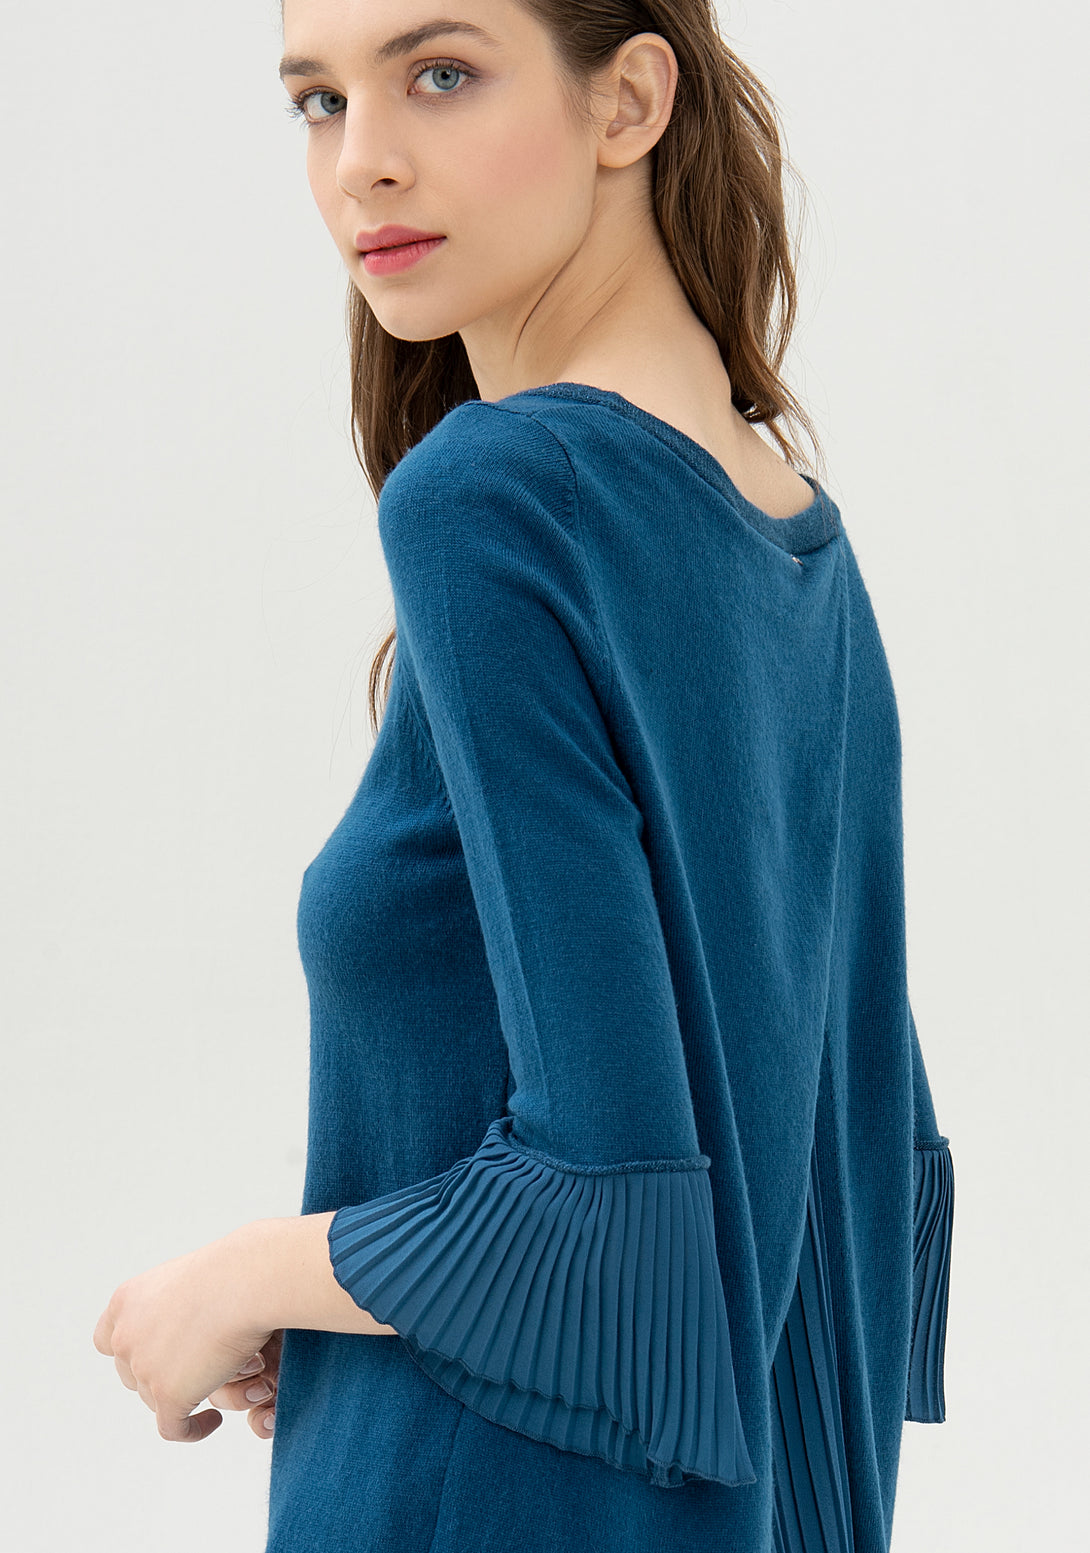 Knitwear tight fit with boat neckline